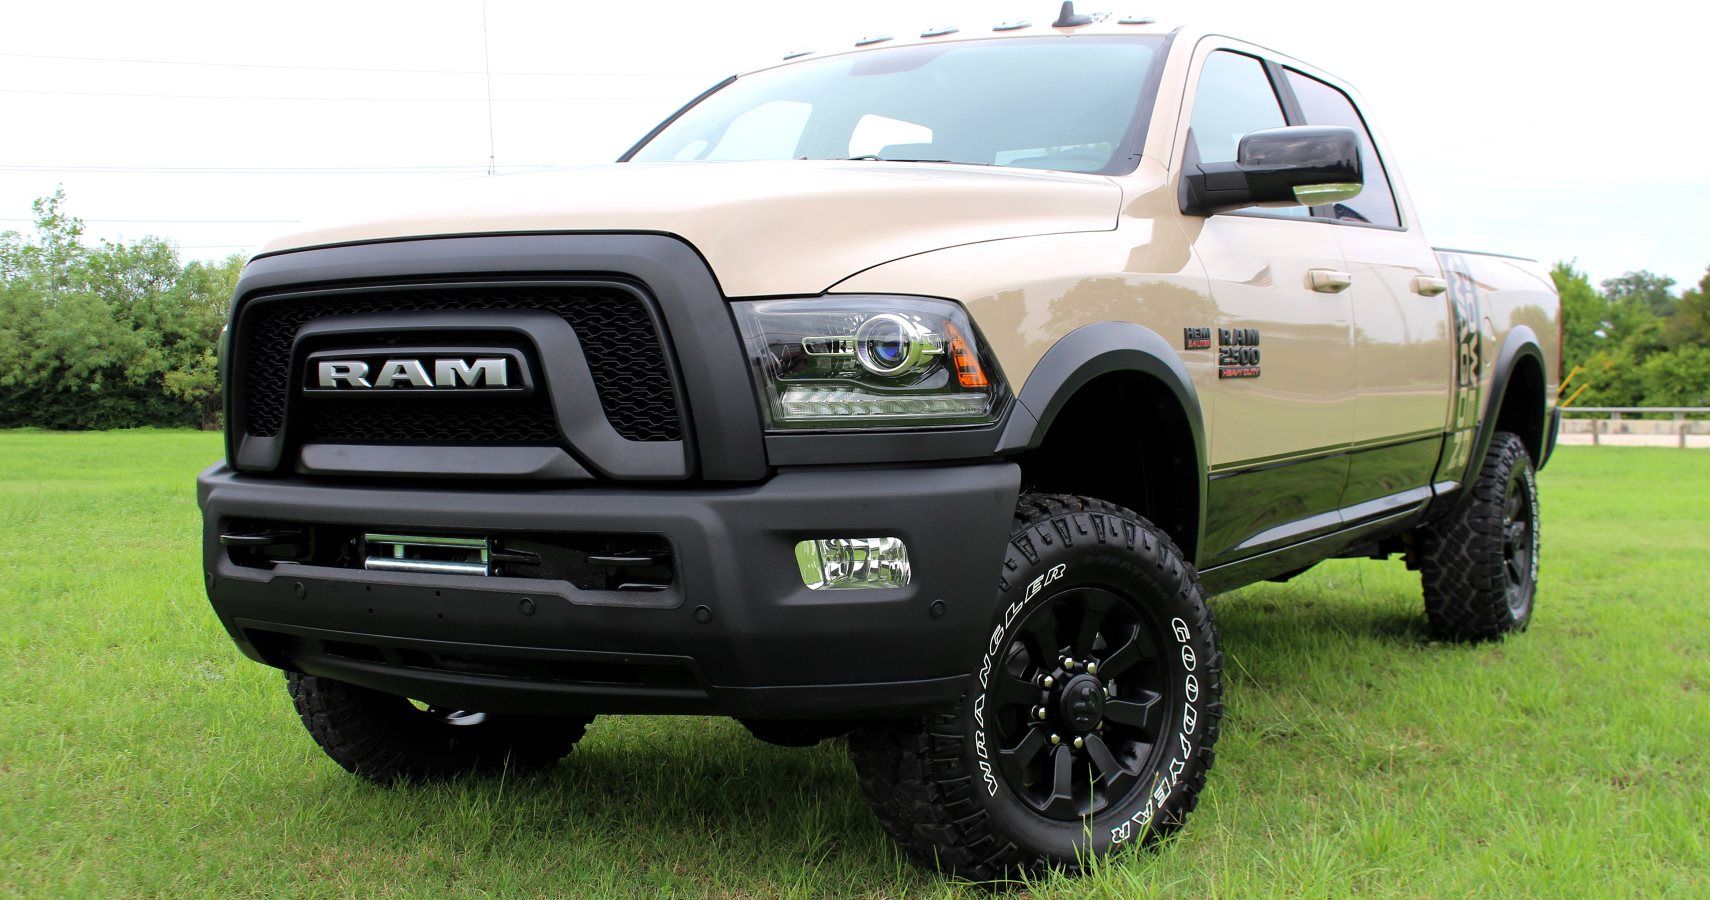 Ram Power Wagon Mojave Sand Limited Edition Is Made To Be Rugged